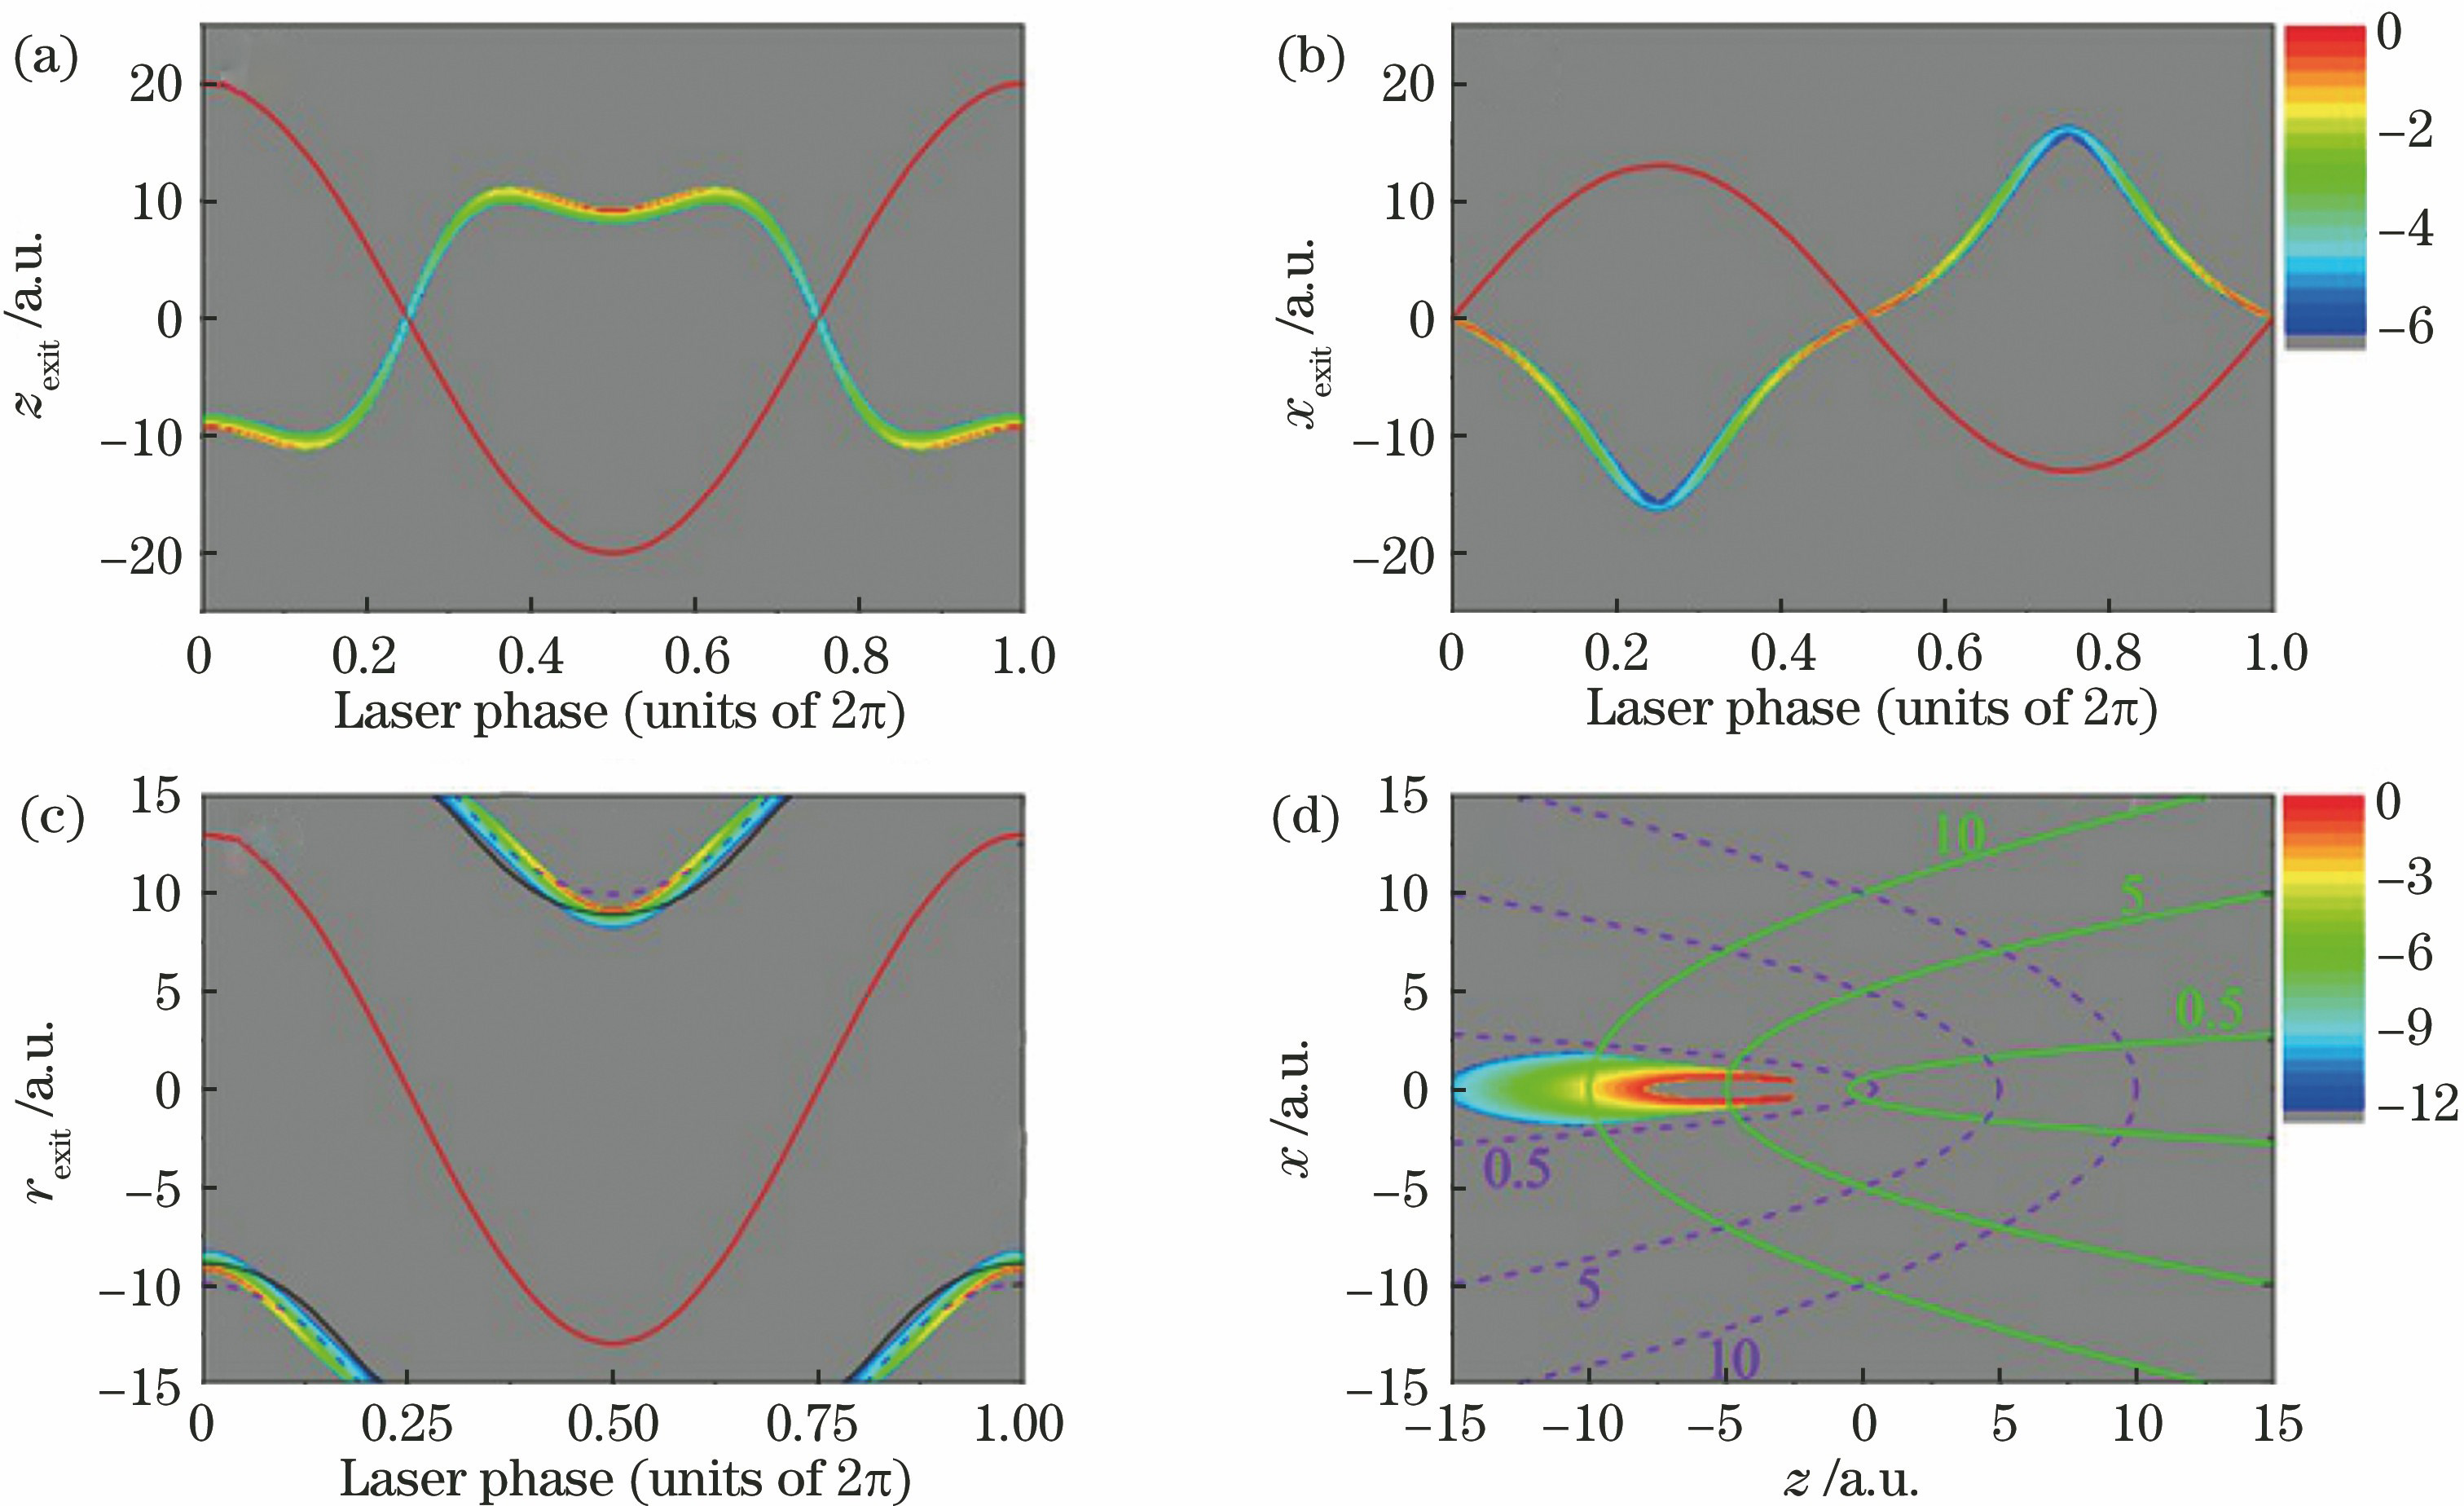 Spatial distributions of the tunneling exit of electron wave packets[26]. (a) Distribution of the tunneling exit of electron wave packets along the z axis; (b) distribution of the tunneling exit of electron wave packets along the x axis; (c) absolute distance distribution of the tunneling exit of electron wave packets. The red line shows the laser field in corresponding direction, the violet dashed line and the black line depict the